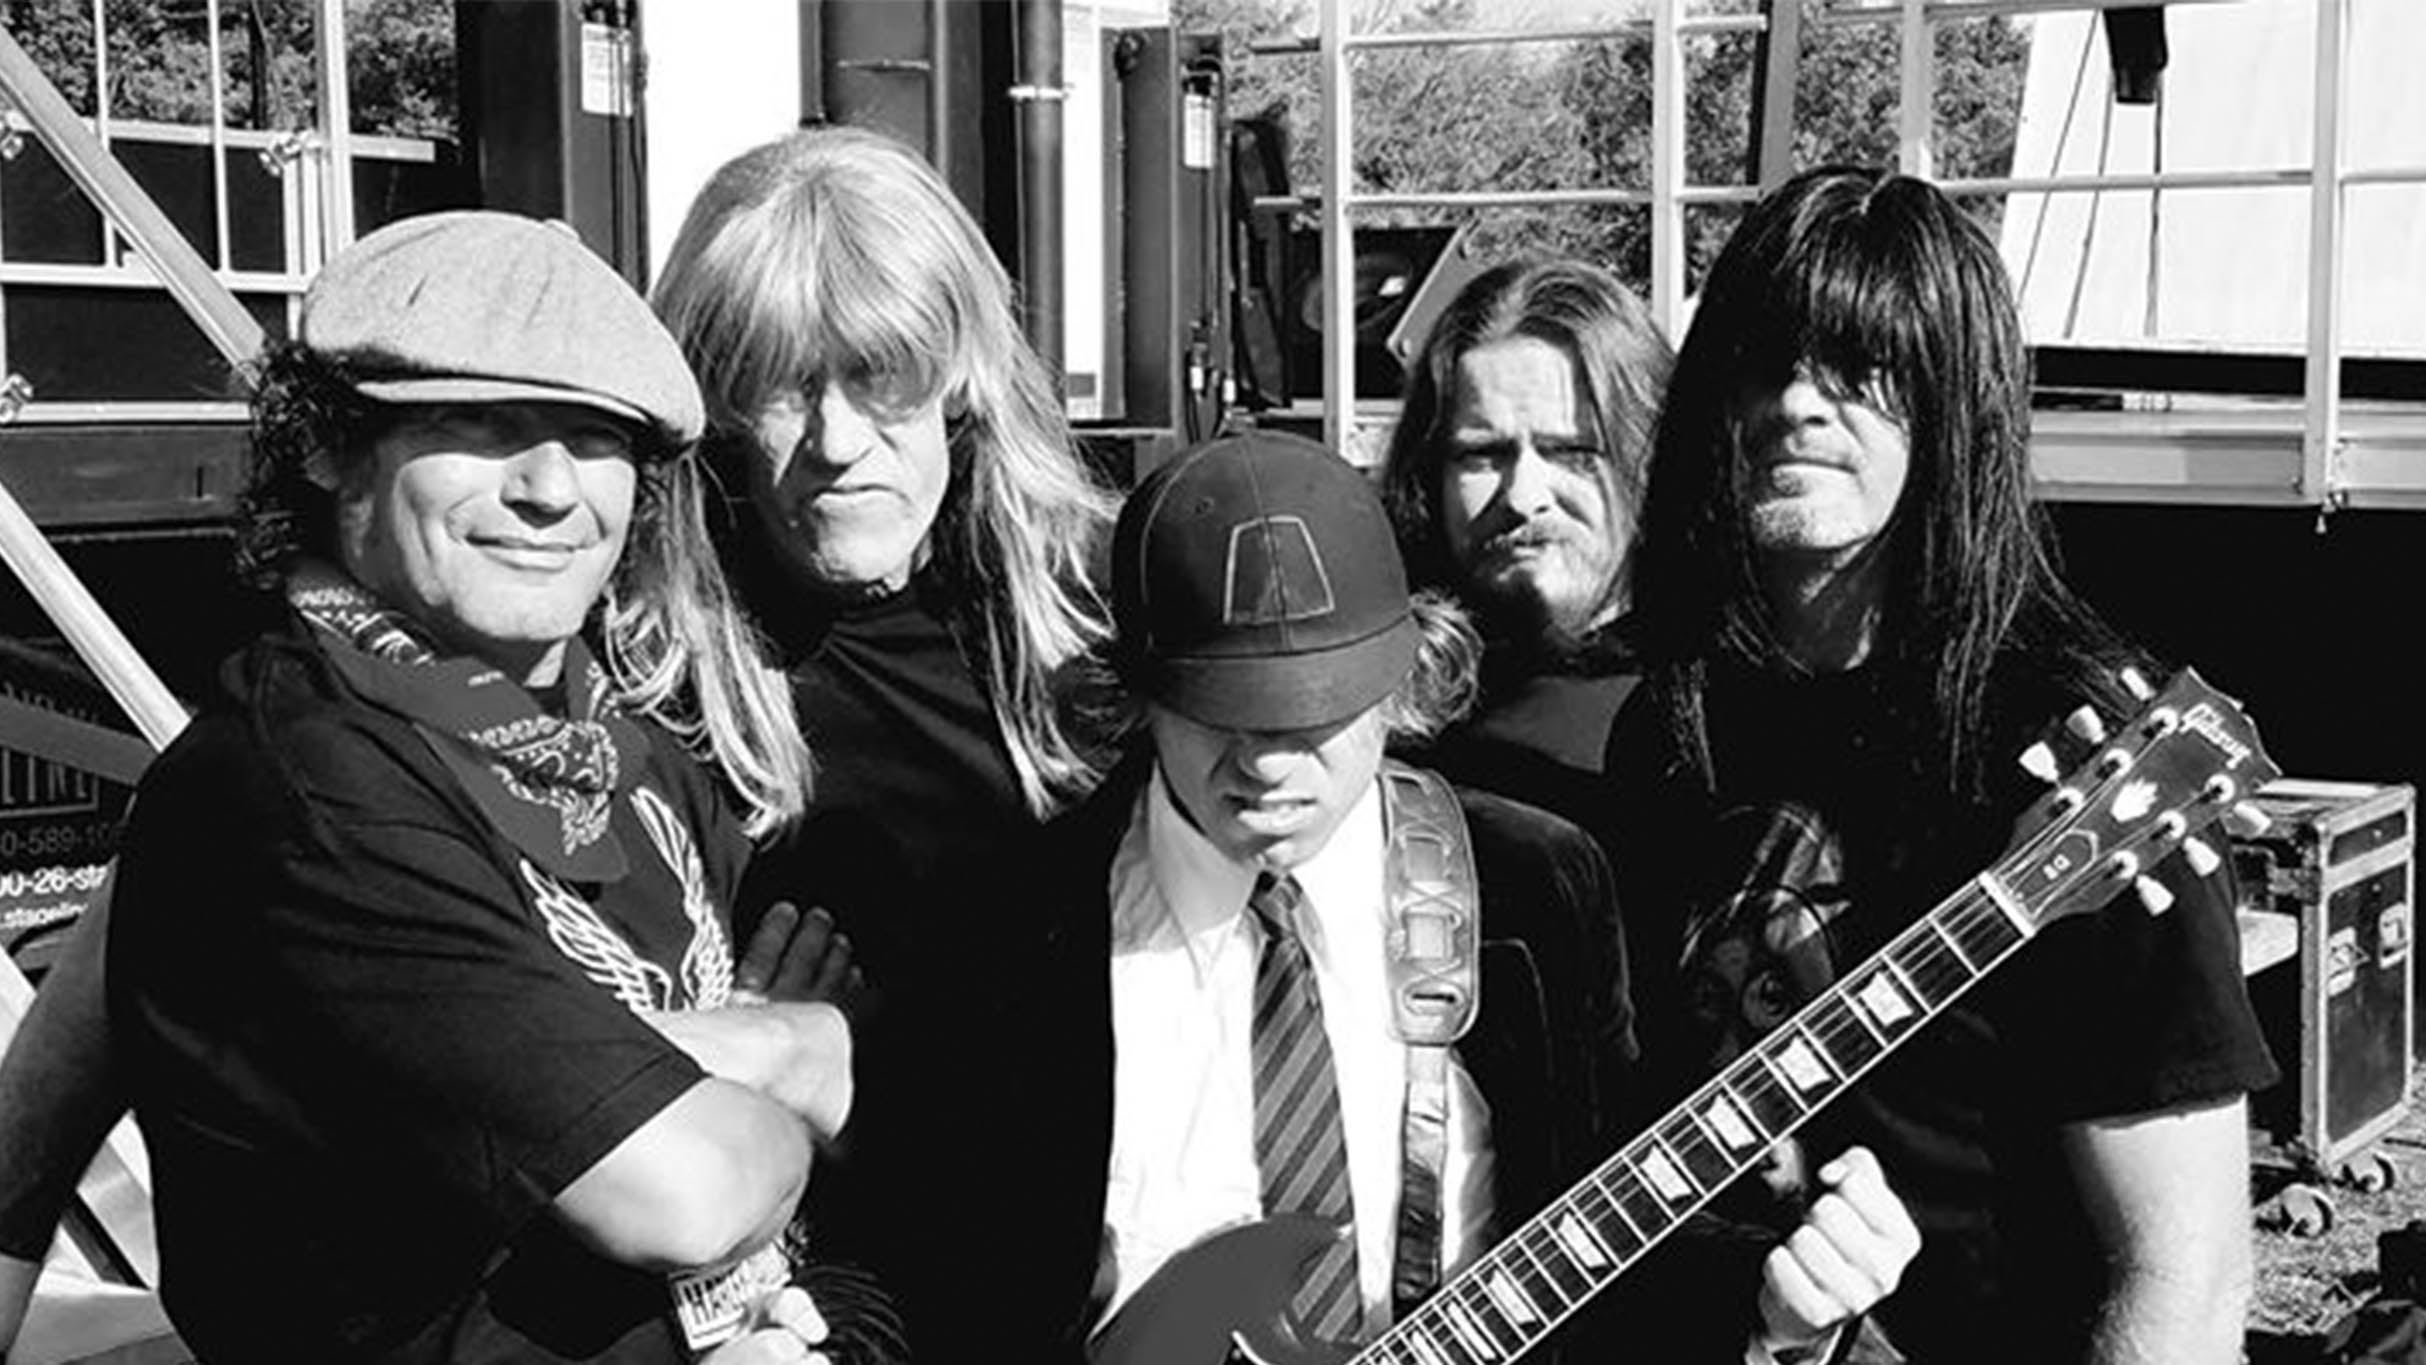 Noise Pollution - AC/DC Experience in Las Vegas promo photo for Rewards presale offer code